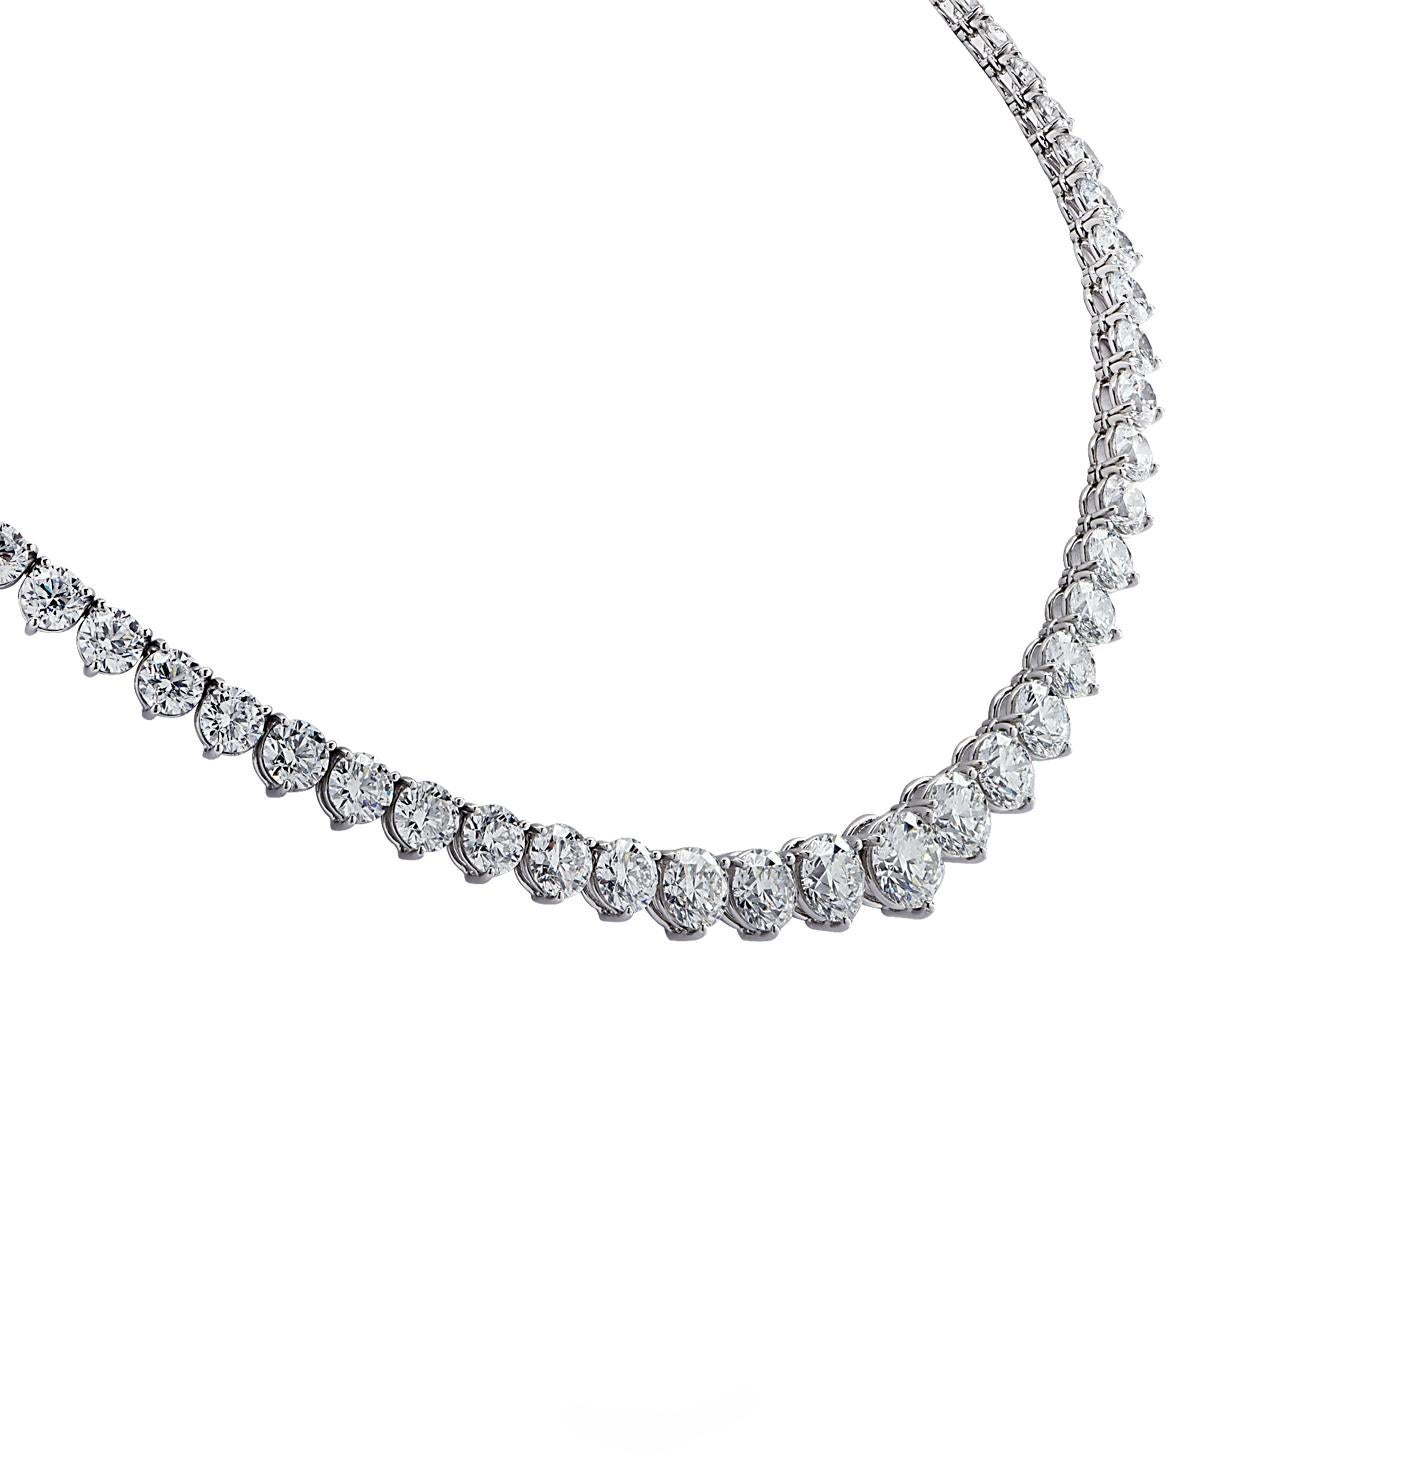 Exquisite Vivid Diamonds diamond Riviere necklace crafted in platinum, showcasing 91 round brilliant cut diamonds weighing 32 carats total, G-H color, VS1-SI2 Clarity. Nine of the largest diamonds are certified by the GIA. The diamonds are set in a